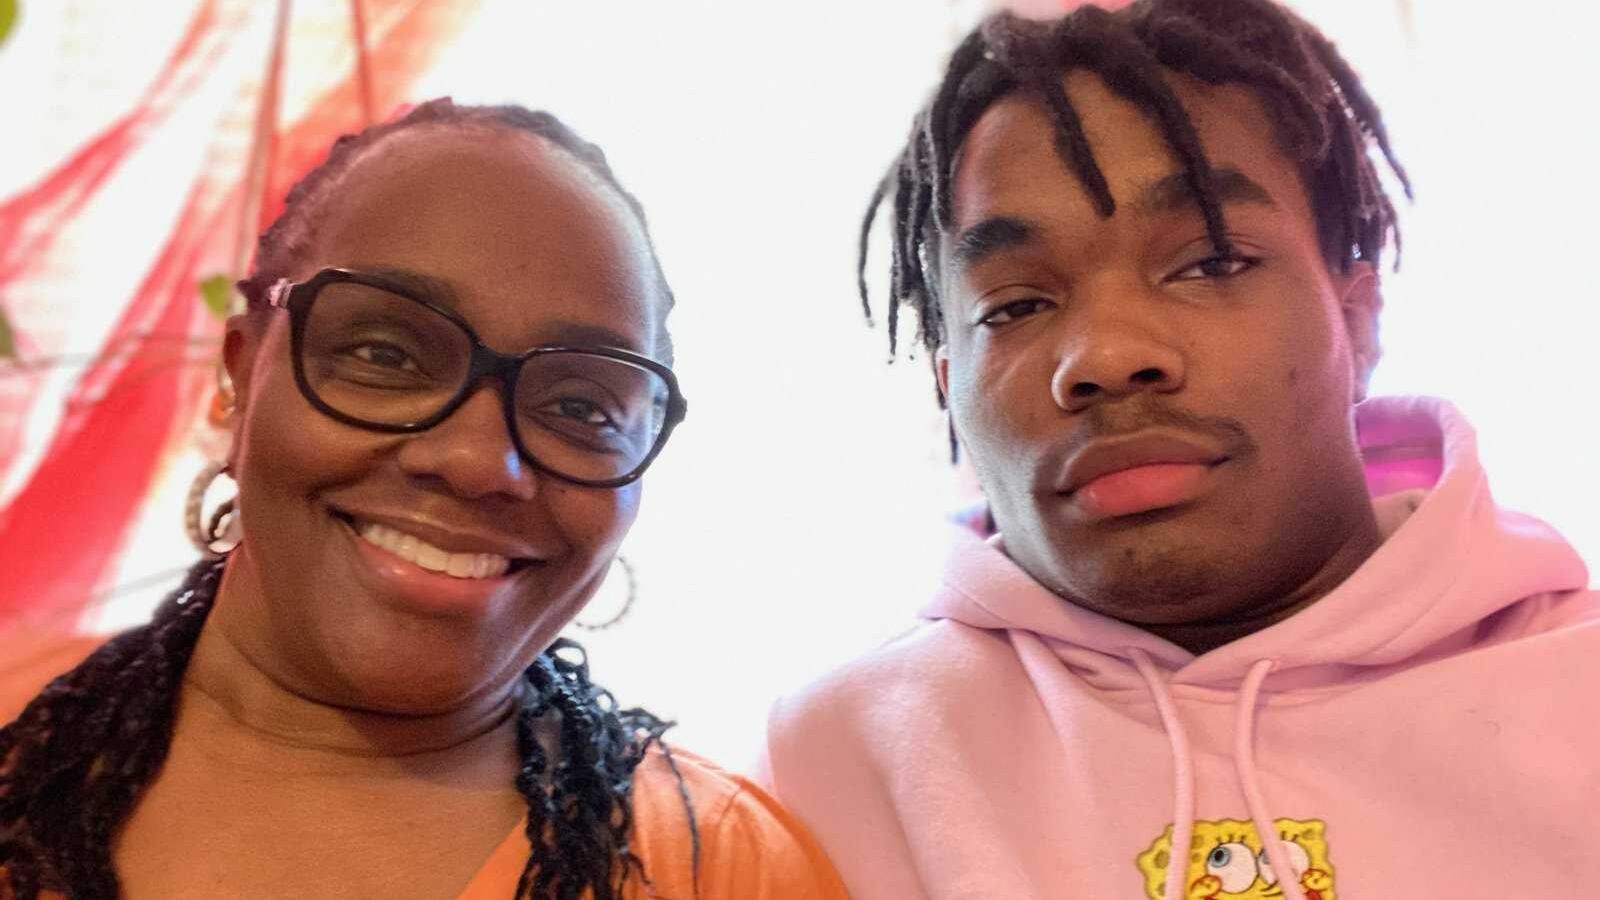 Kymberly Calhoun and her son, Marquis Hare, are riding out the pandemic at home.